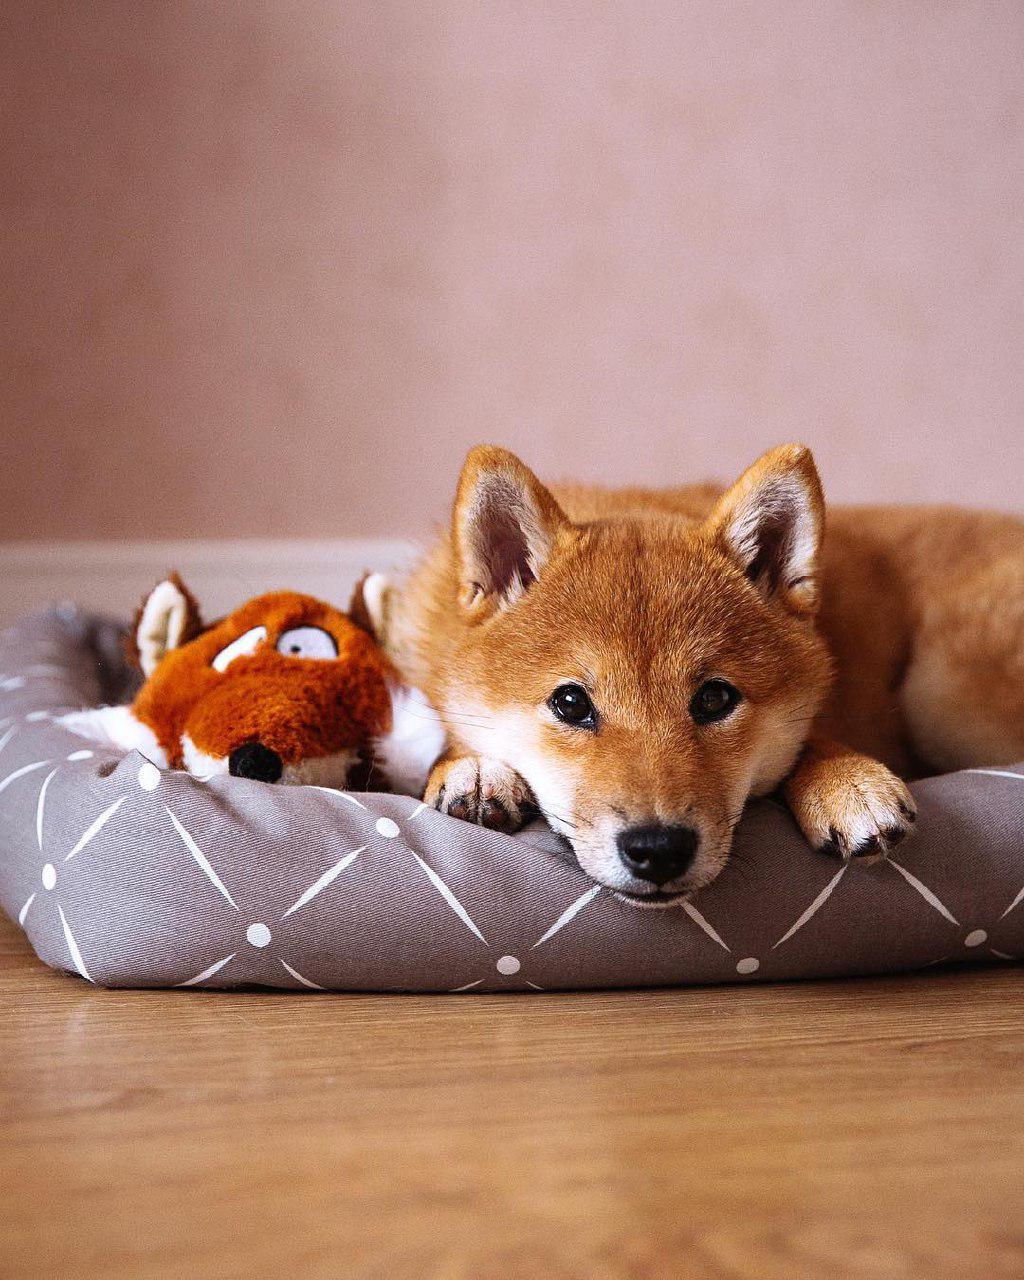 A Shiba Inu lying on the bed with a fox stuffed toy next to him